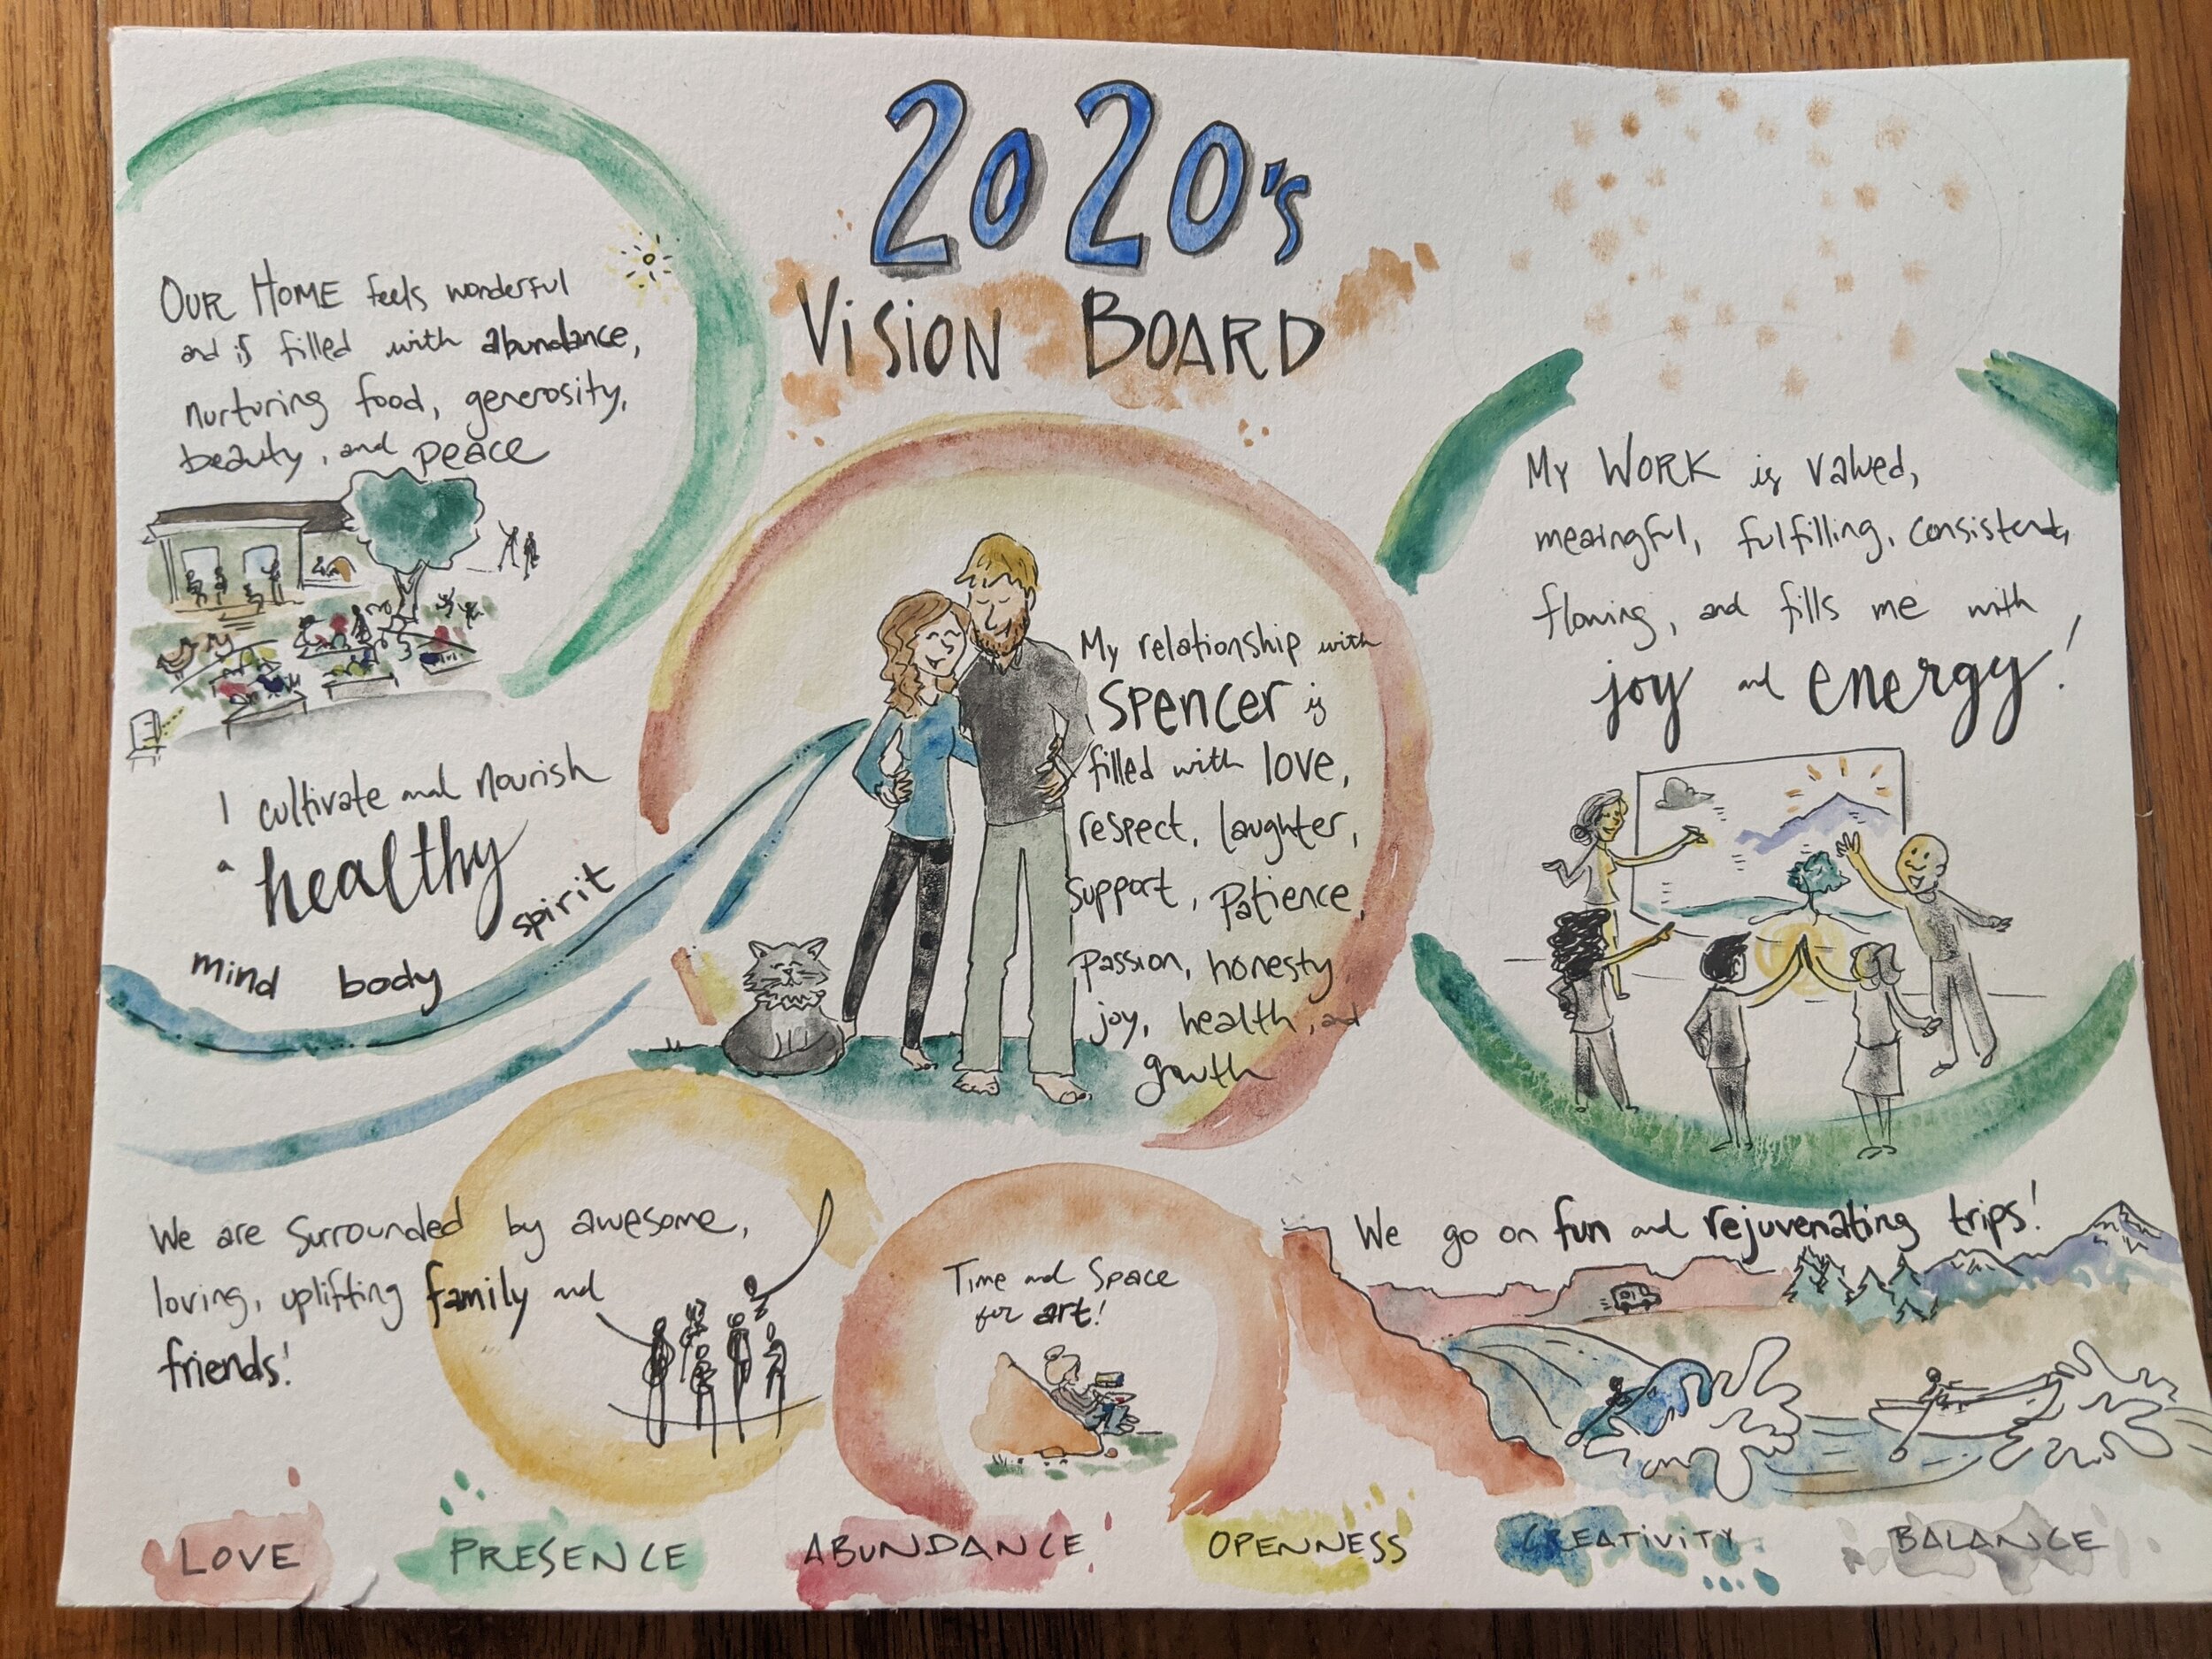 Creating Your 2024 Vision Board: Manifesting Success, Health, and Abundance